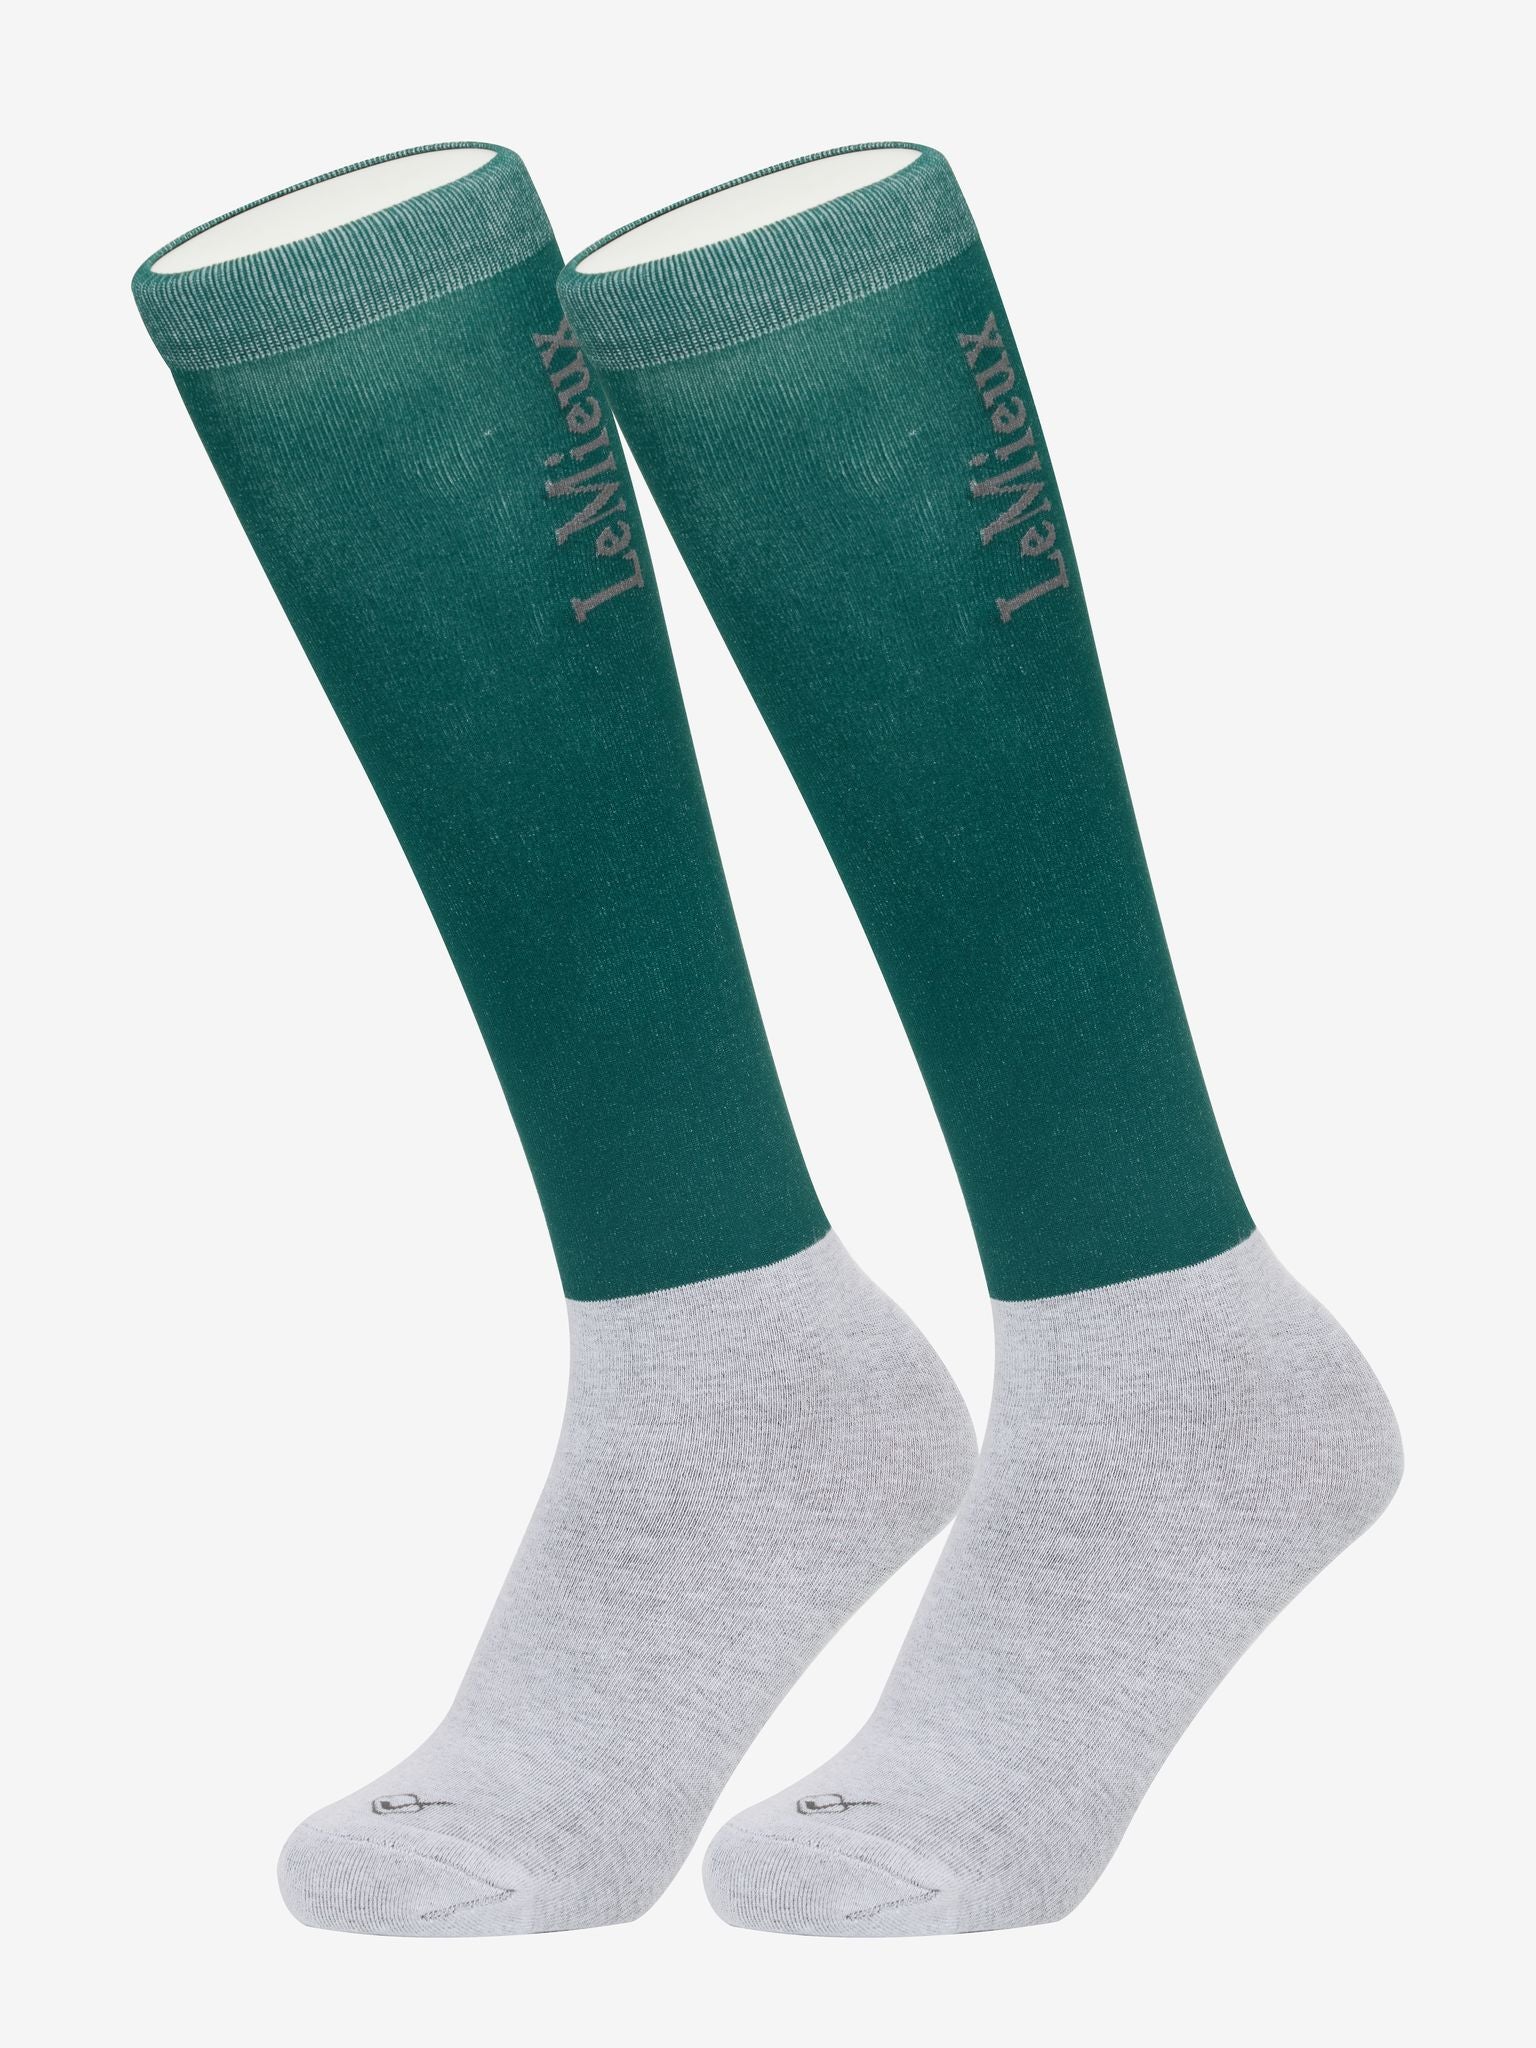 LeMieux Competition Socks (Twin Pack) - AW23